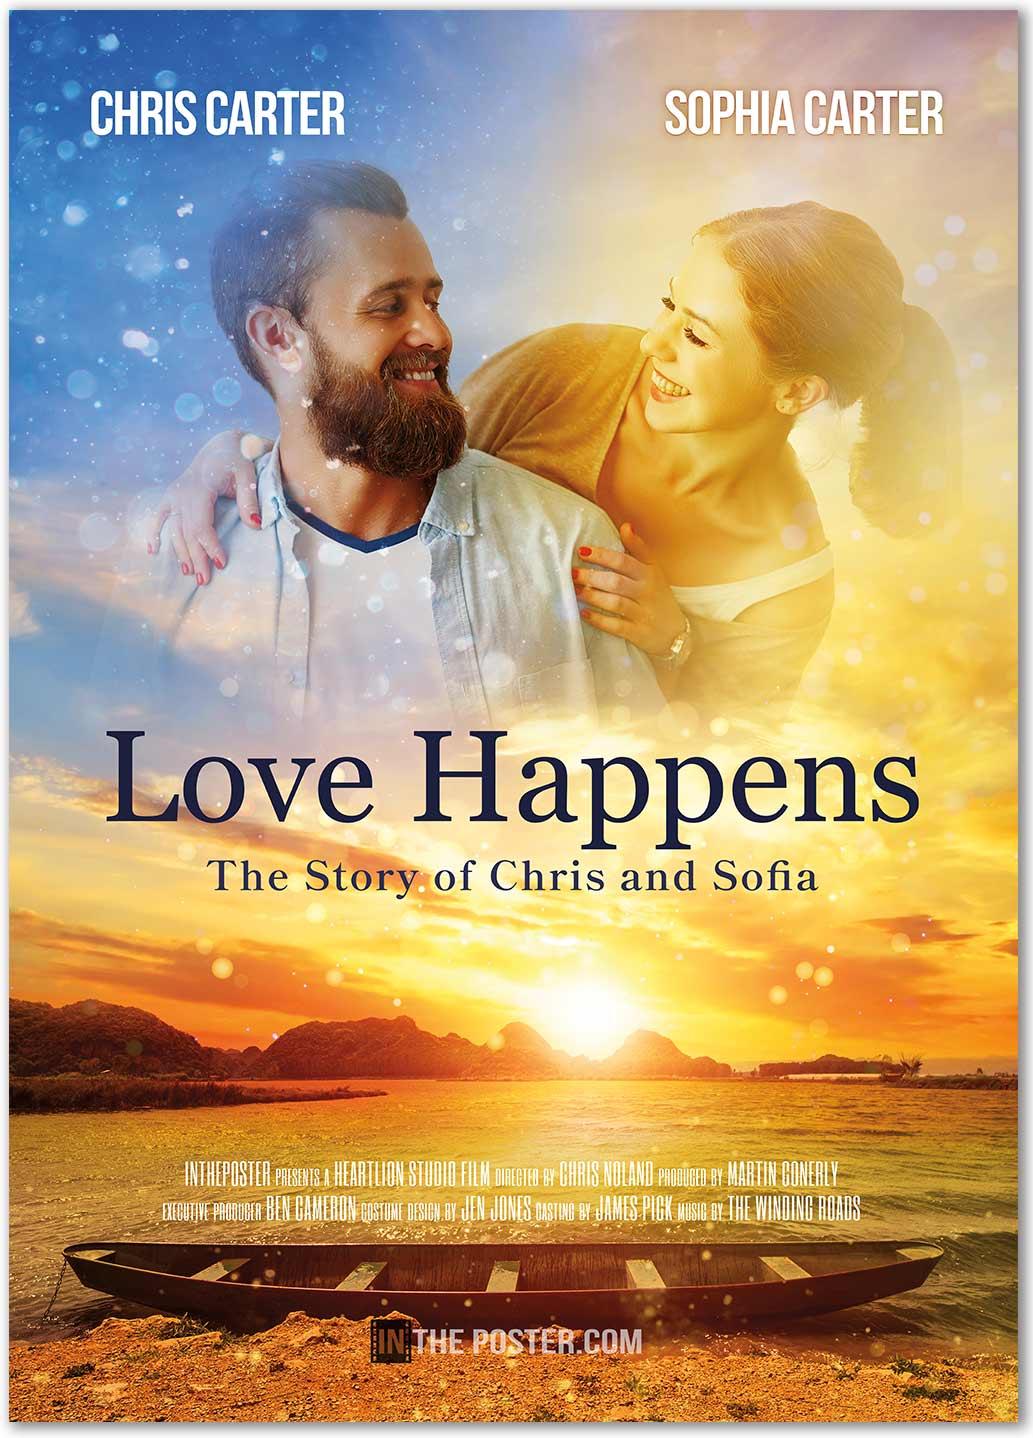 Romantic love happens movie poster with a smiling couple against a sunset sky with a boat